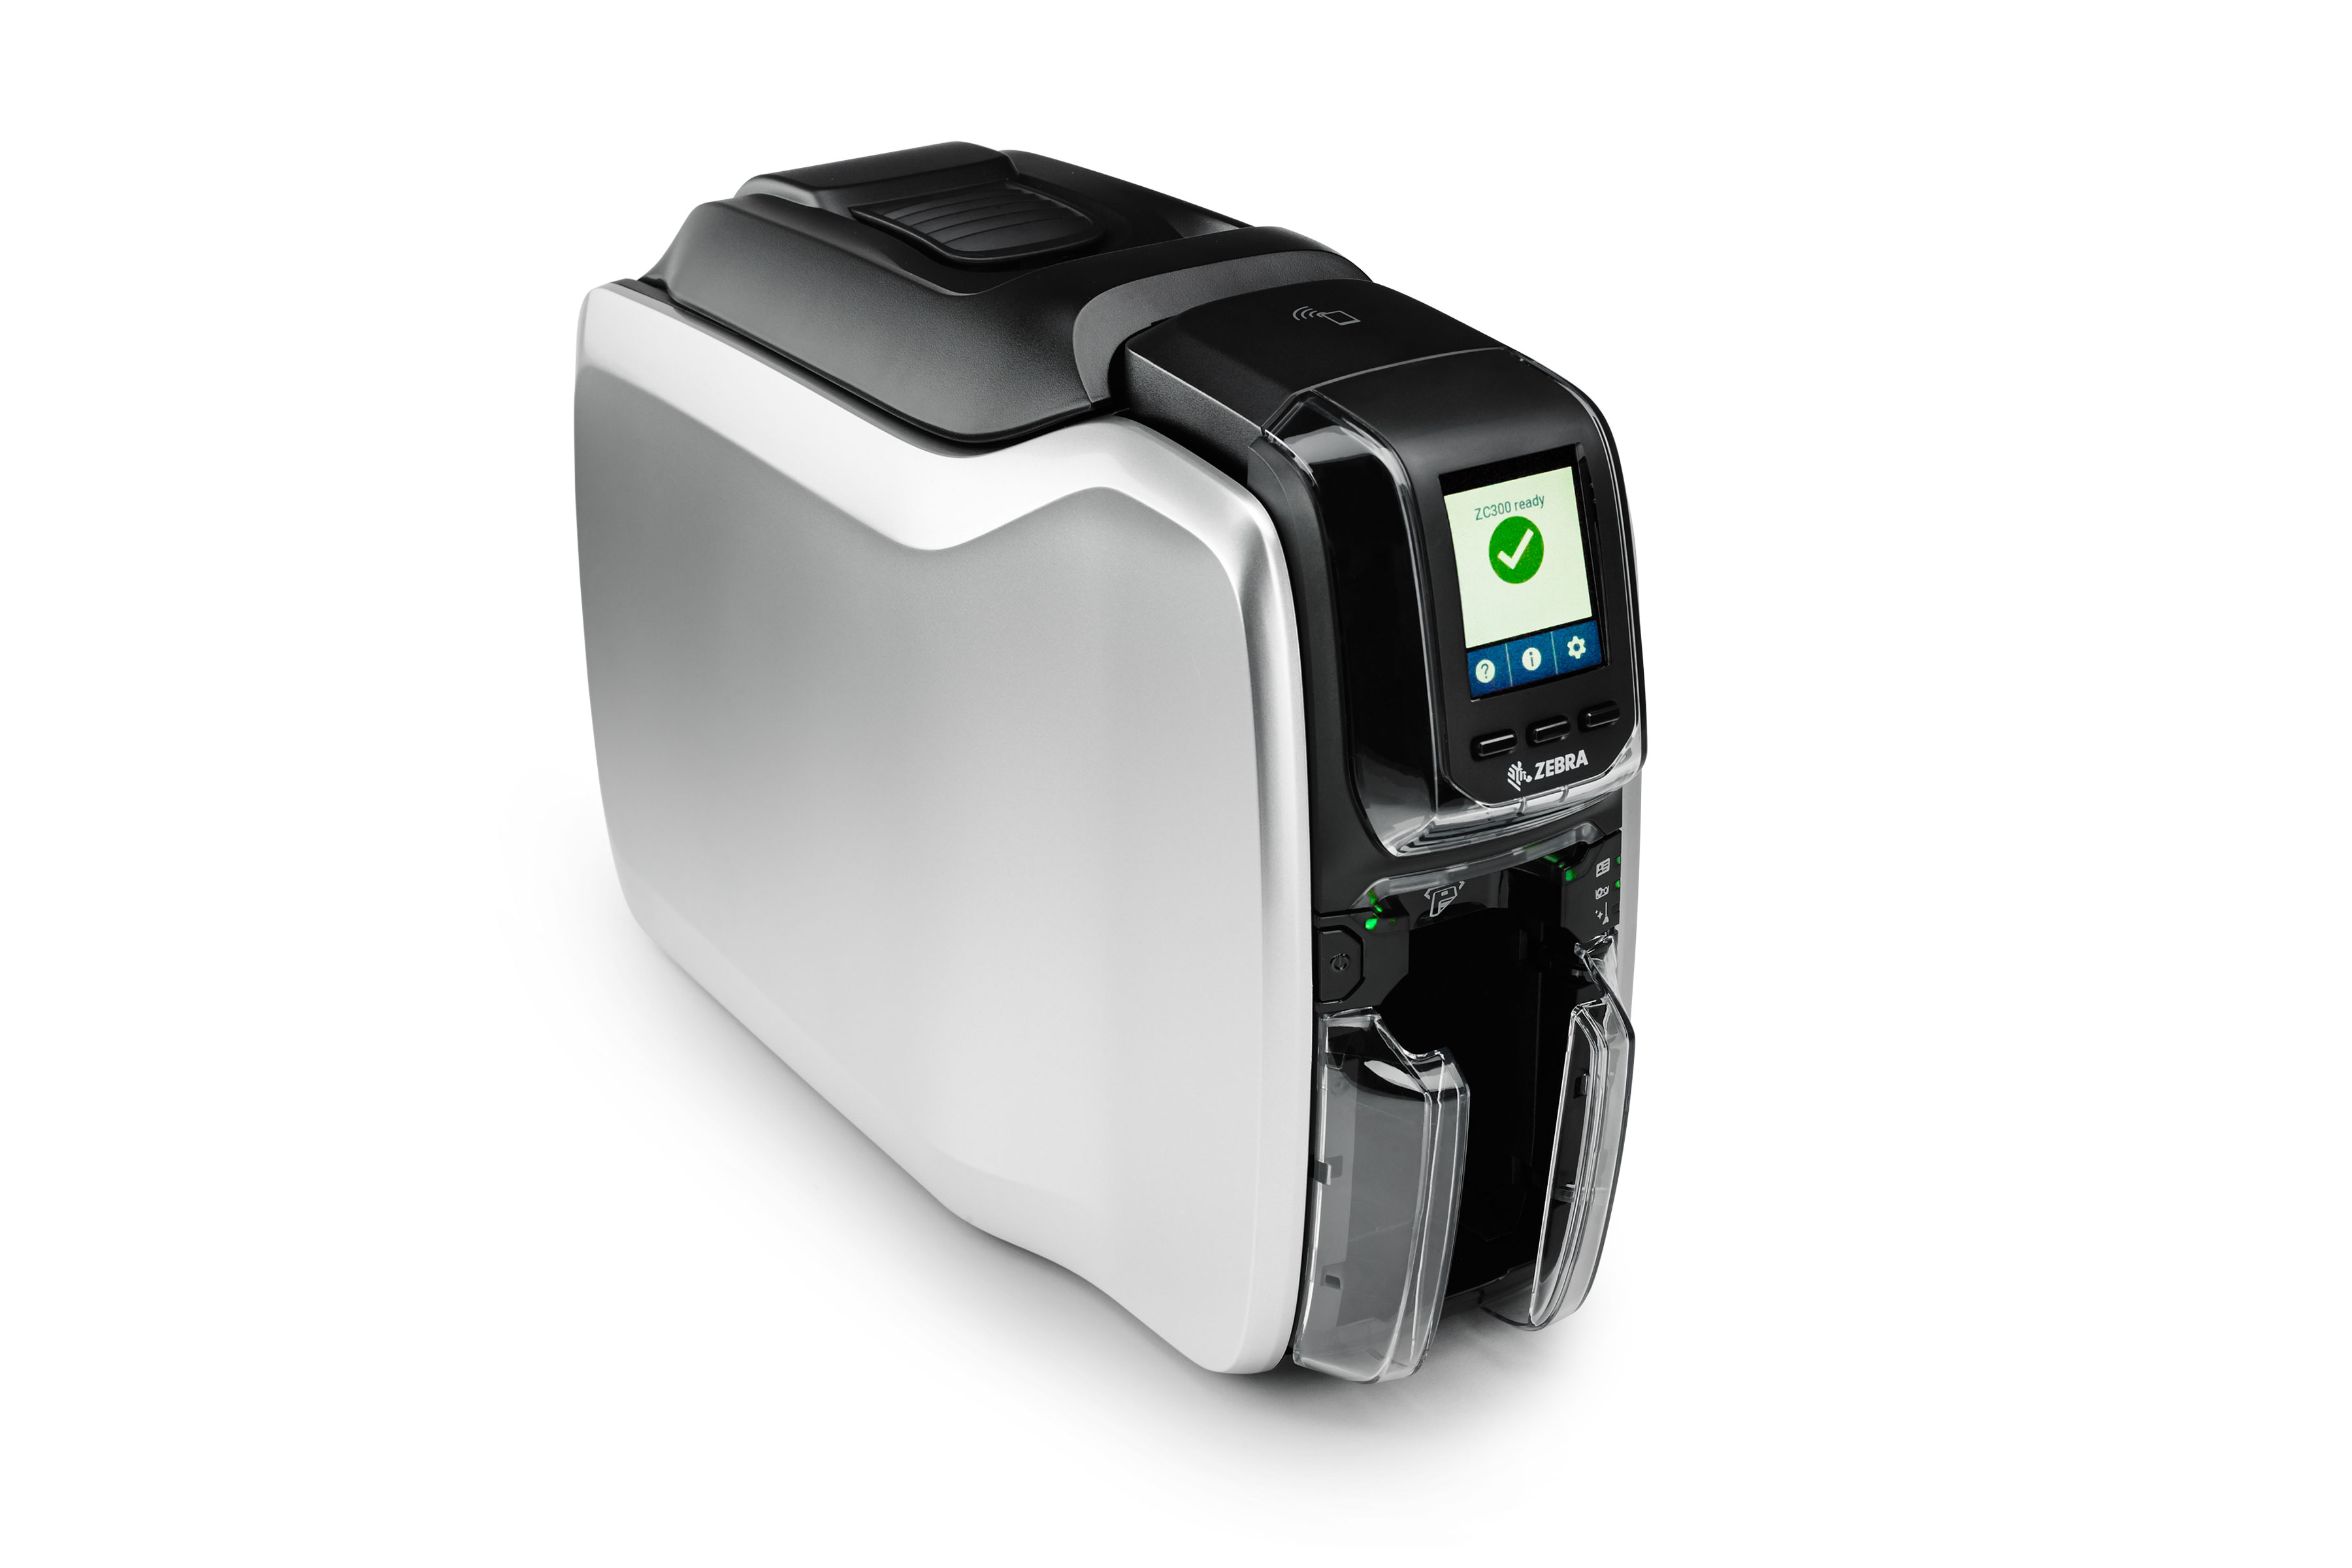 Zebra ZC300 ID card printer with LCD display and integrated card feeder